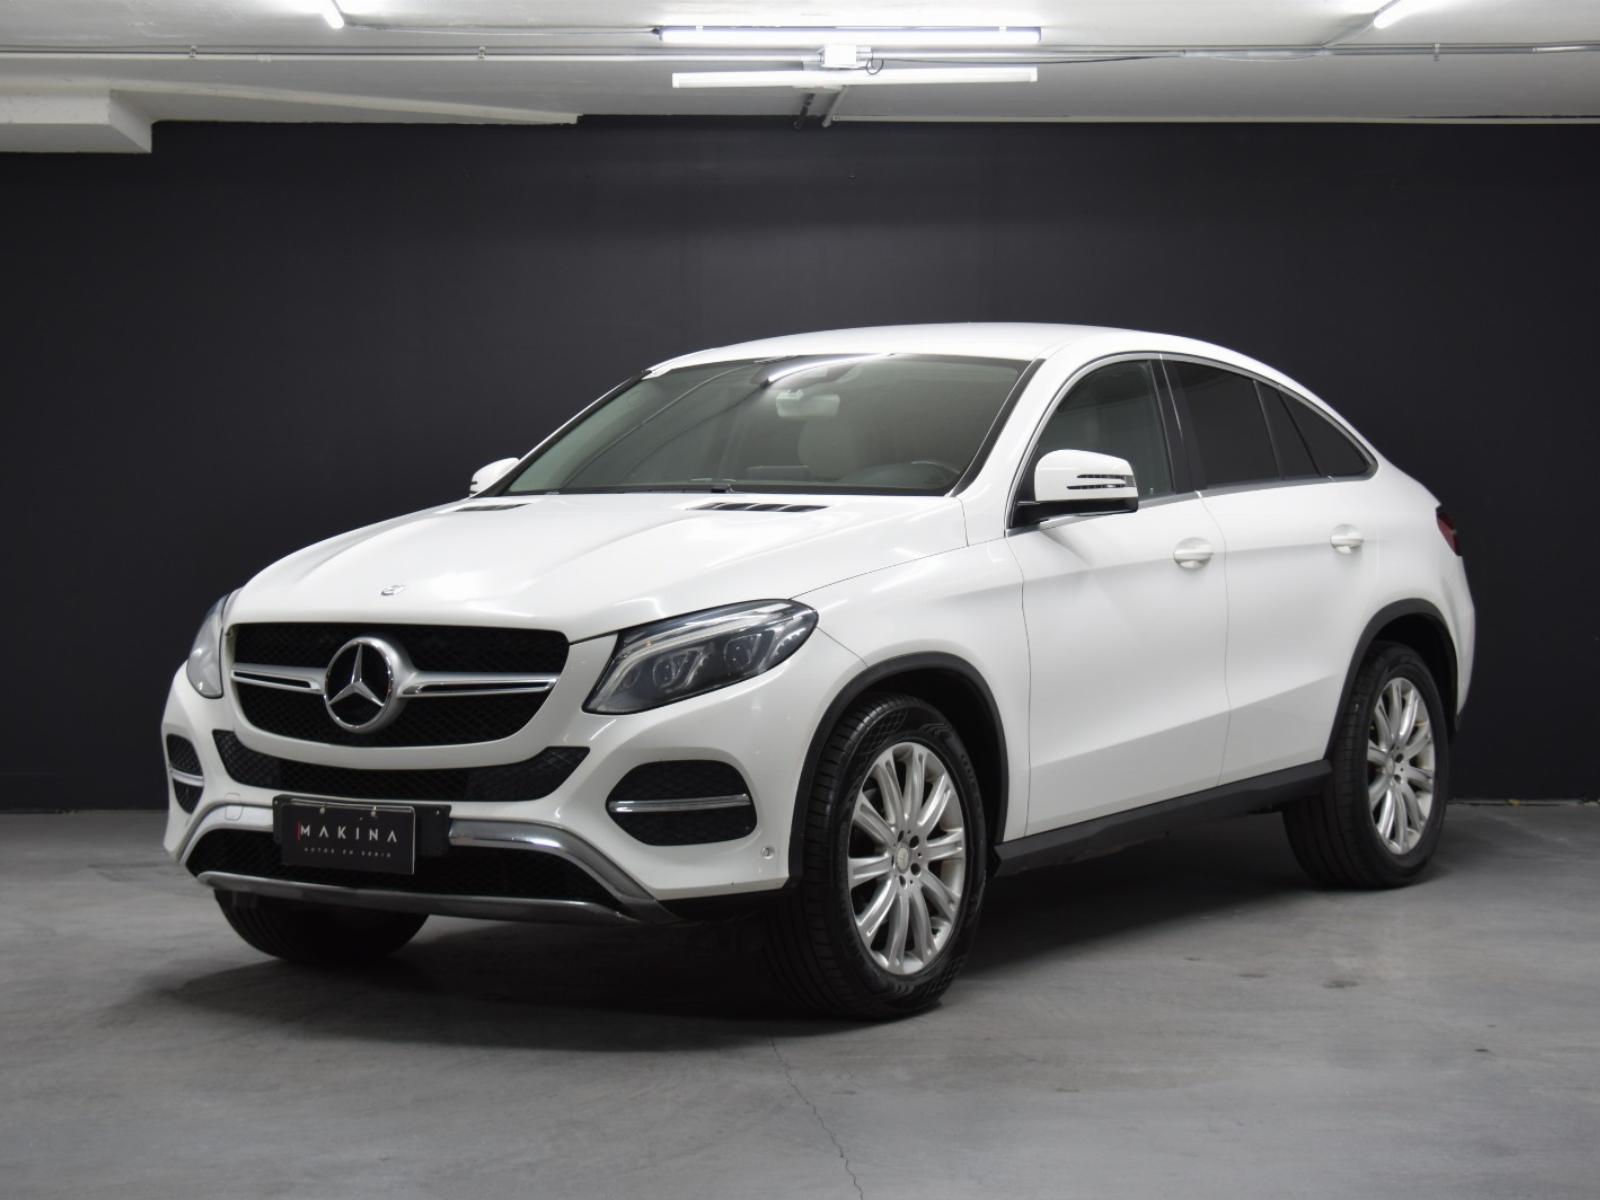 MERCEDES-BENZ GLE 350D COUPE 2017 REAL OPORTUNIDAD - FULL MOTOR